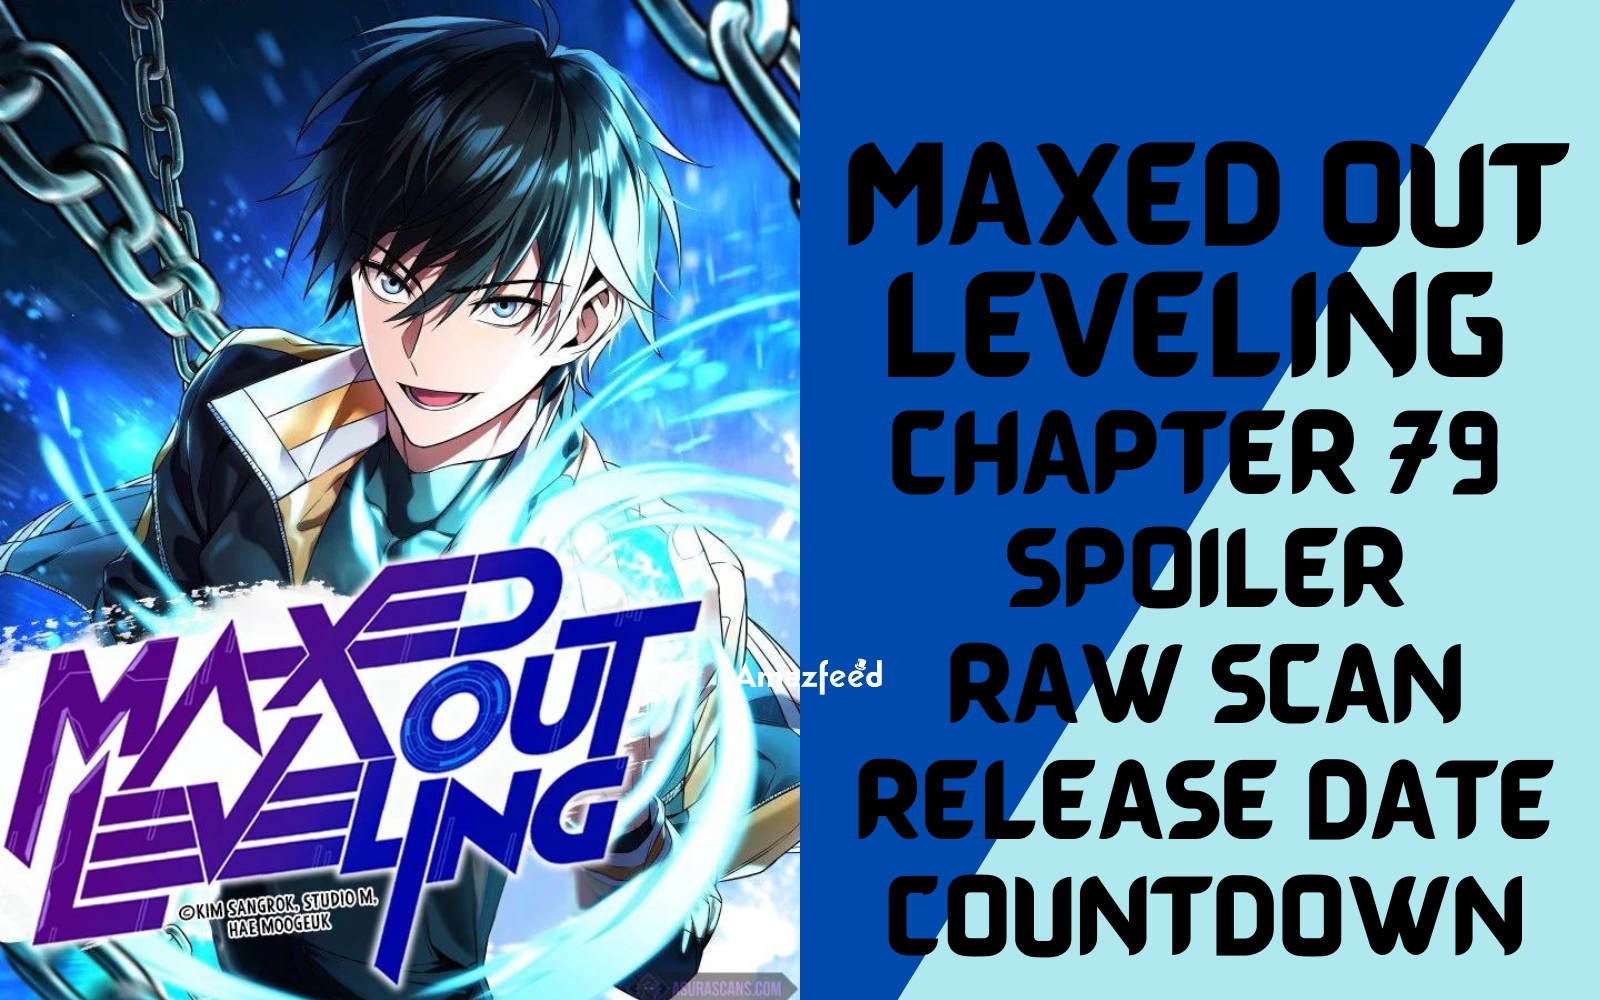 Maxed Out Leveling Chapter 79 Spoiler, Raw Scan, Plot, Release Date, Count Down » Amazfeed